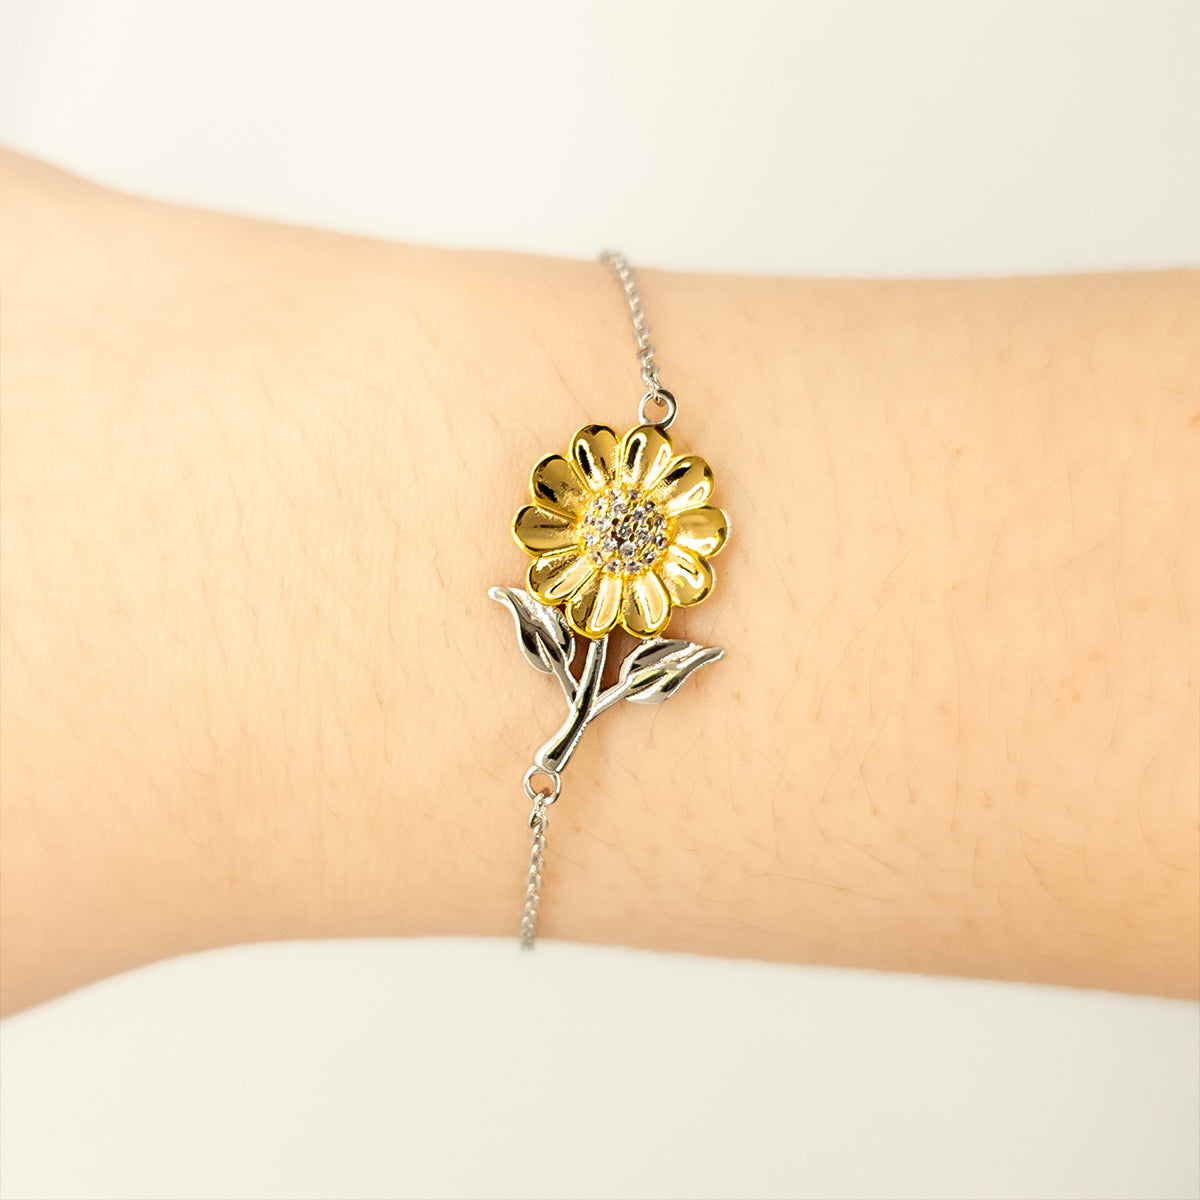 Nephew Sunflower Bracelet, Never forget that I love you forever, Inspirational Nephew Birthday Unique Gifts From Favorite uncle